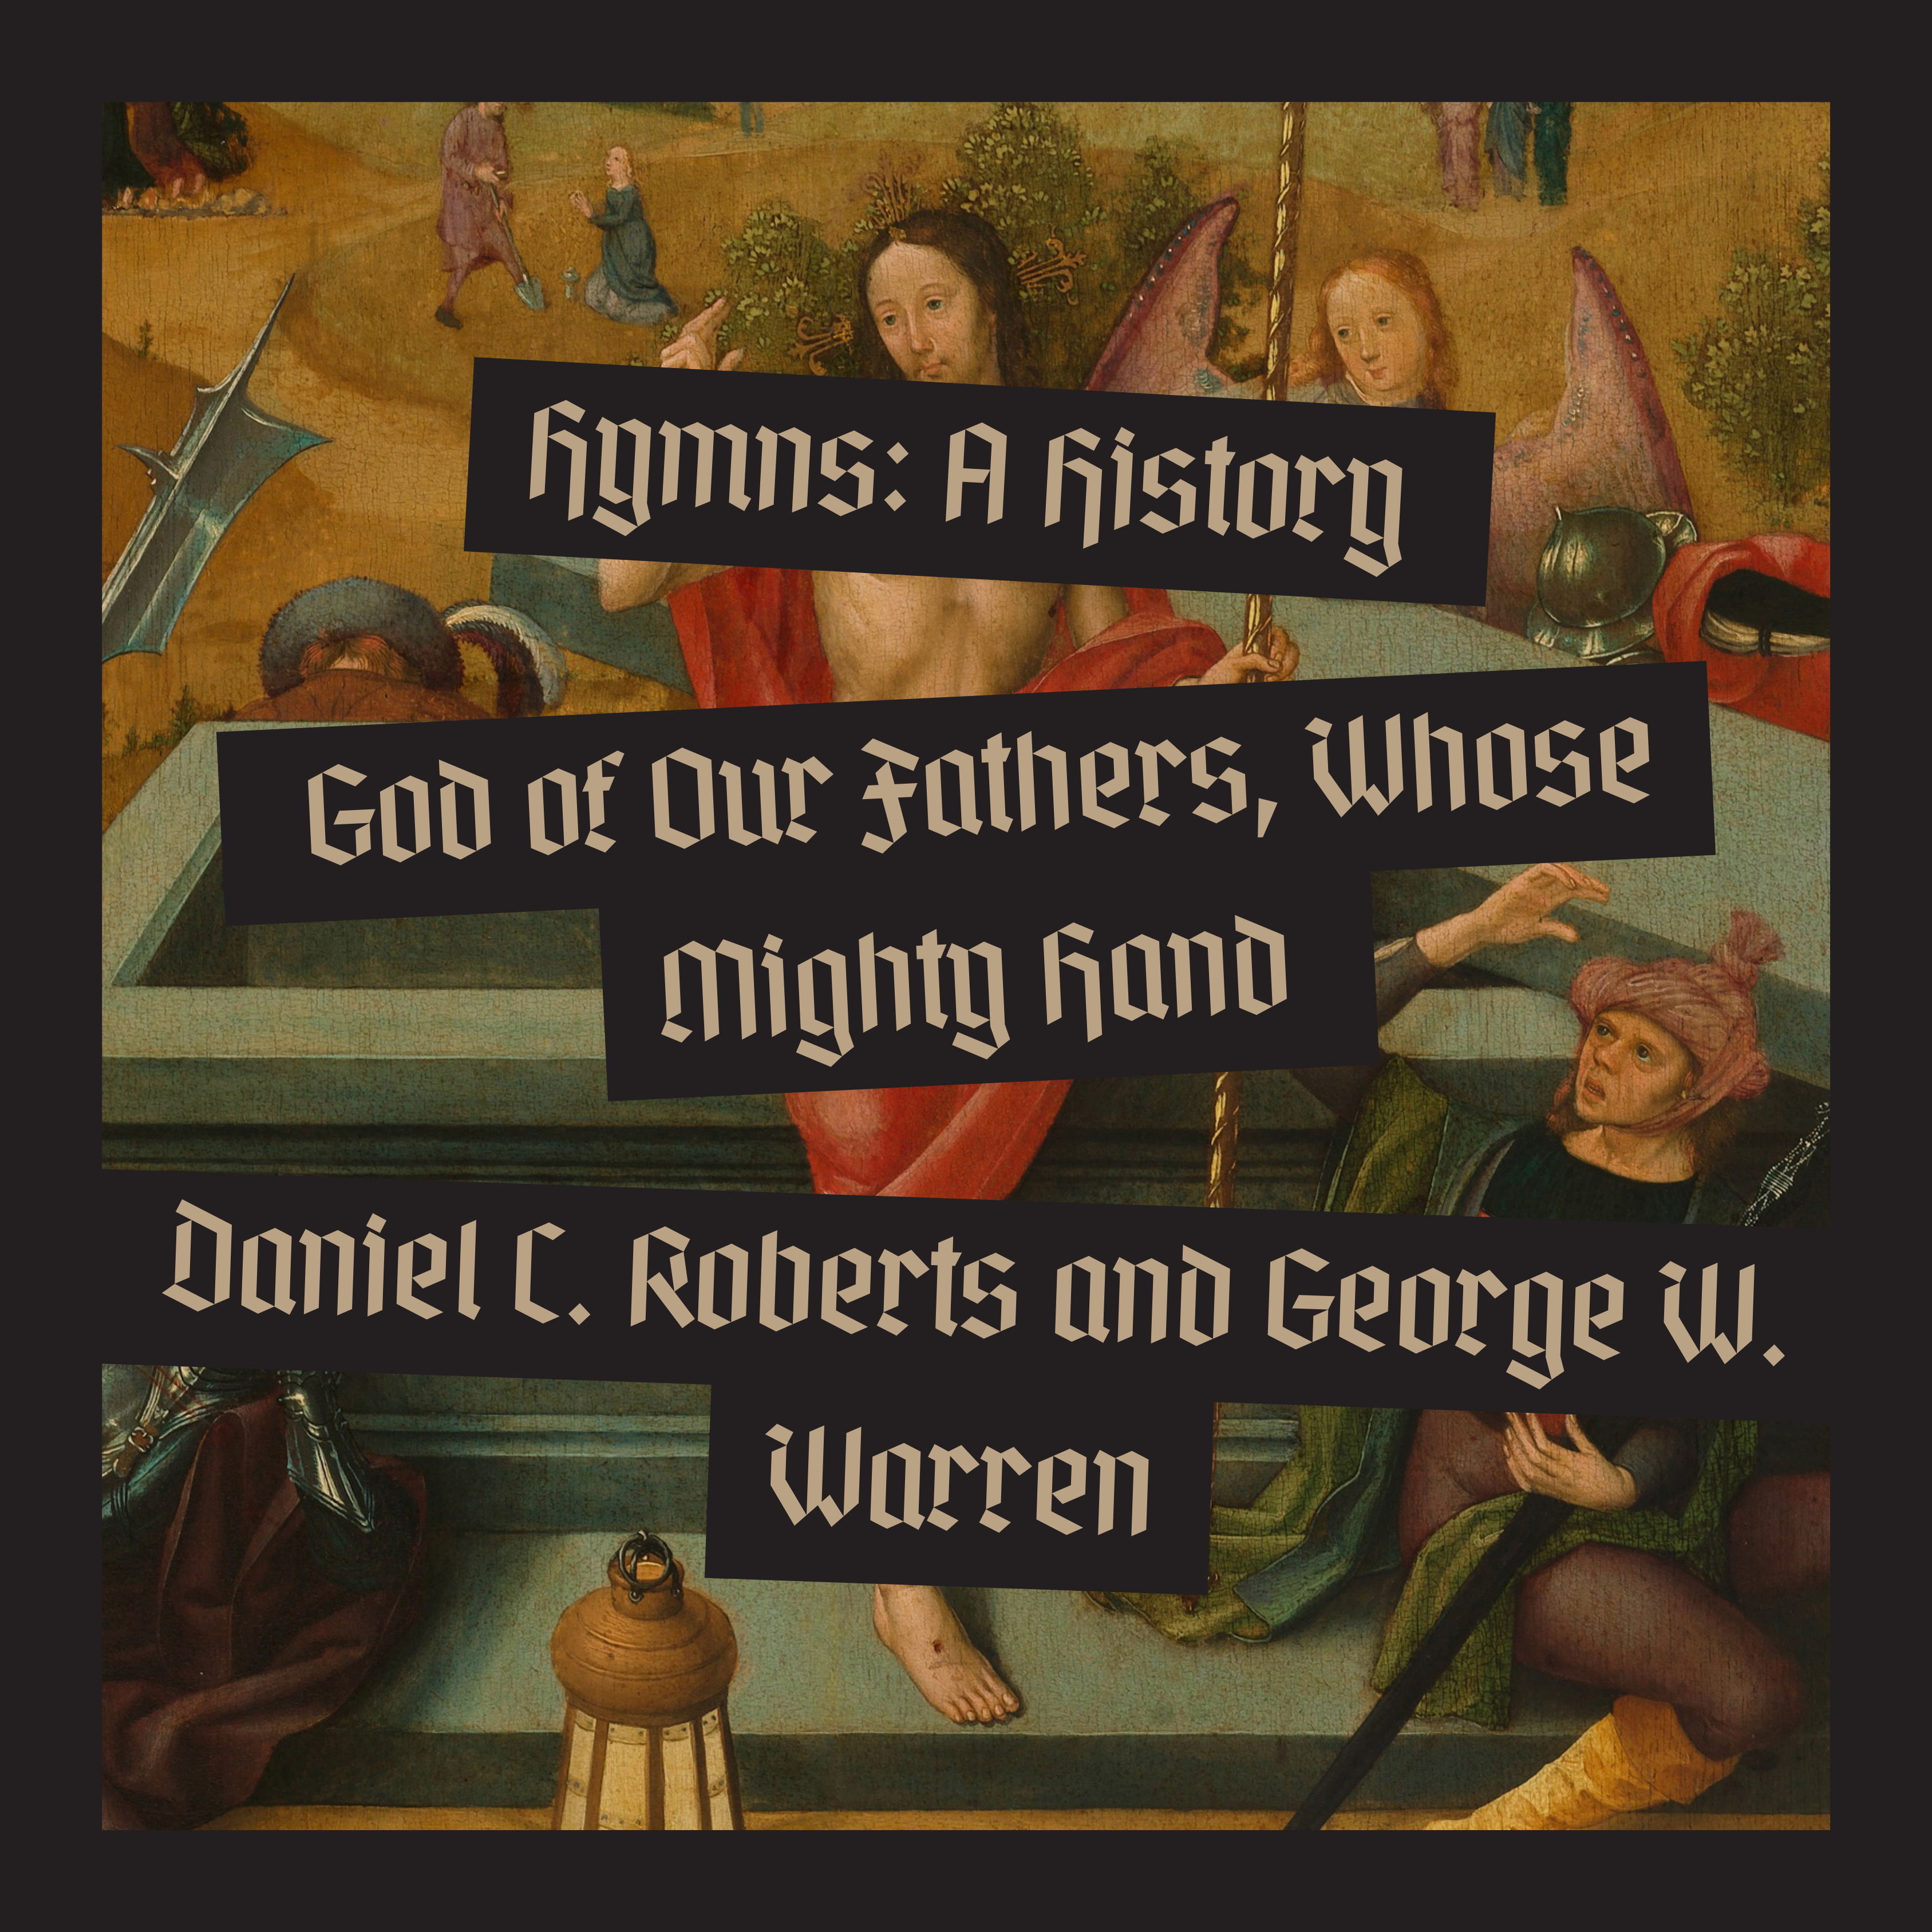 God of Our Fathers, Whose Almighty Hand by Daniel C. Roberts